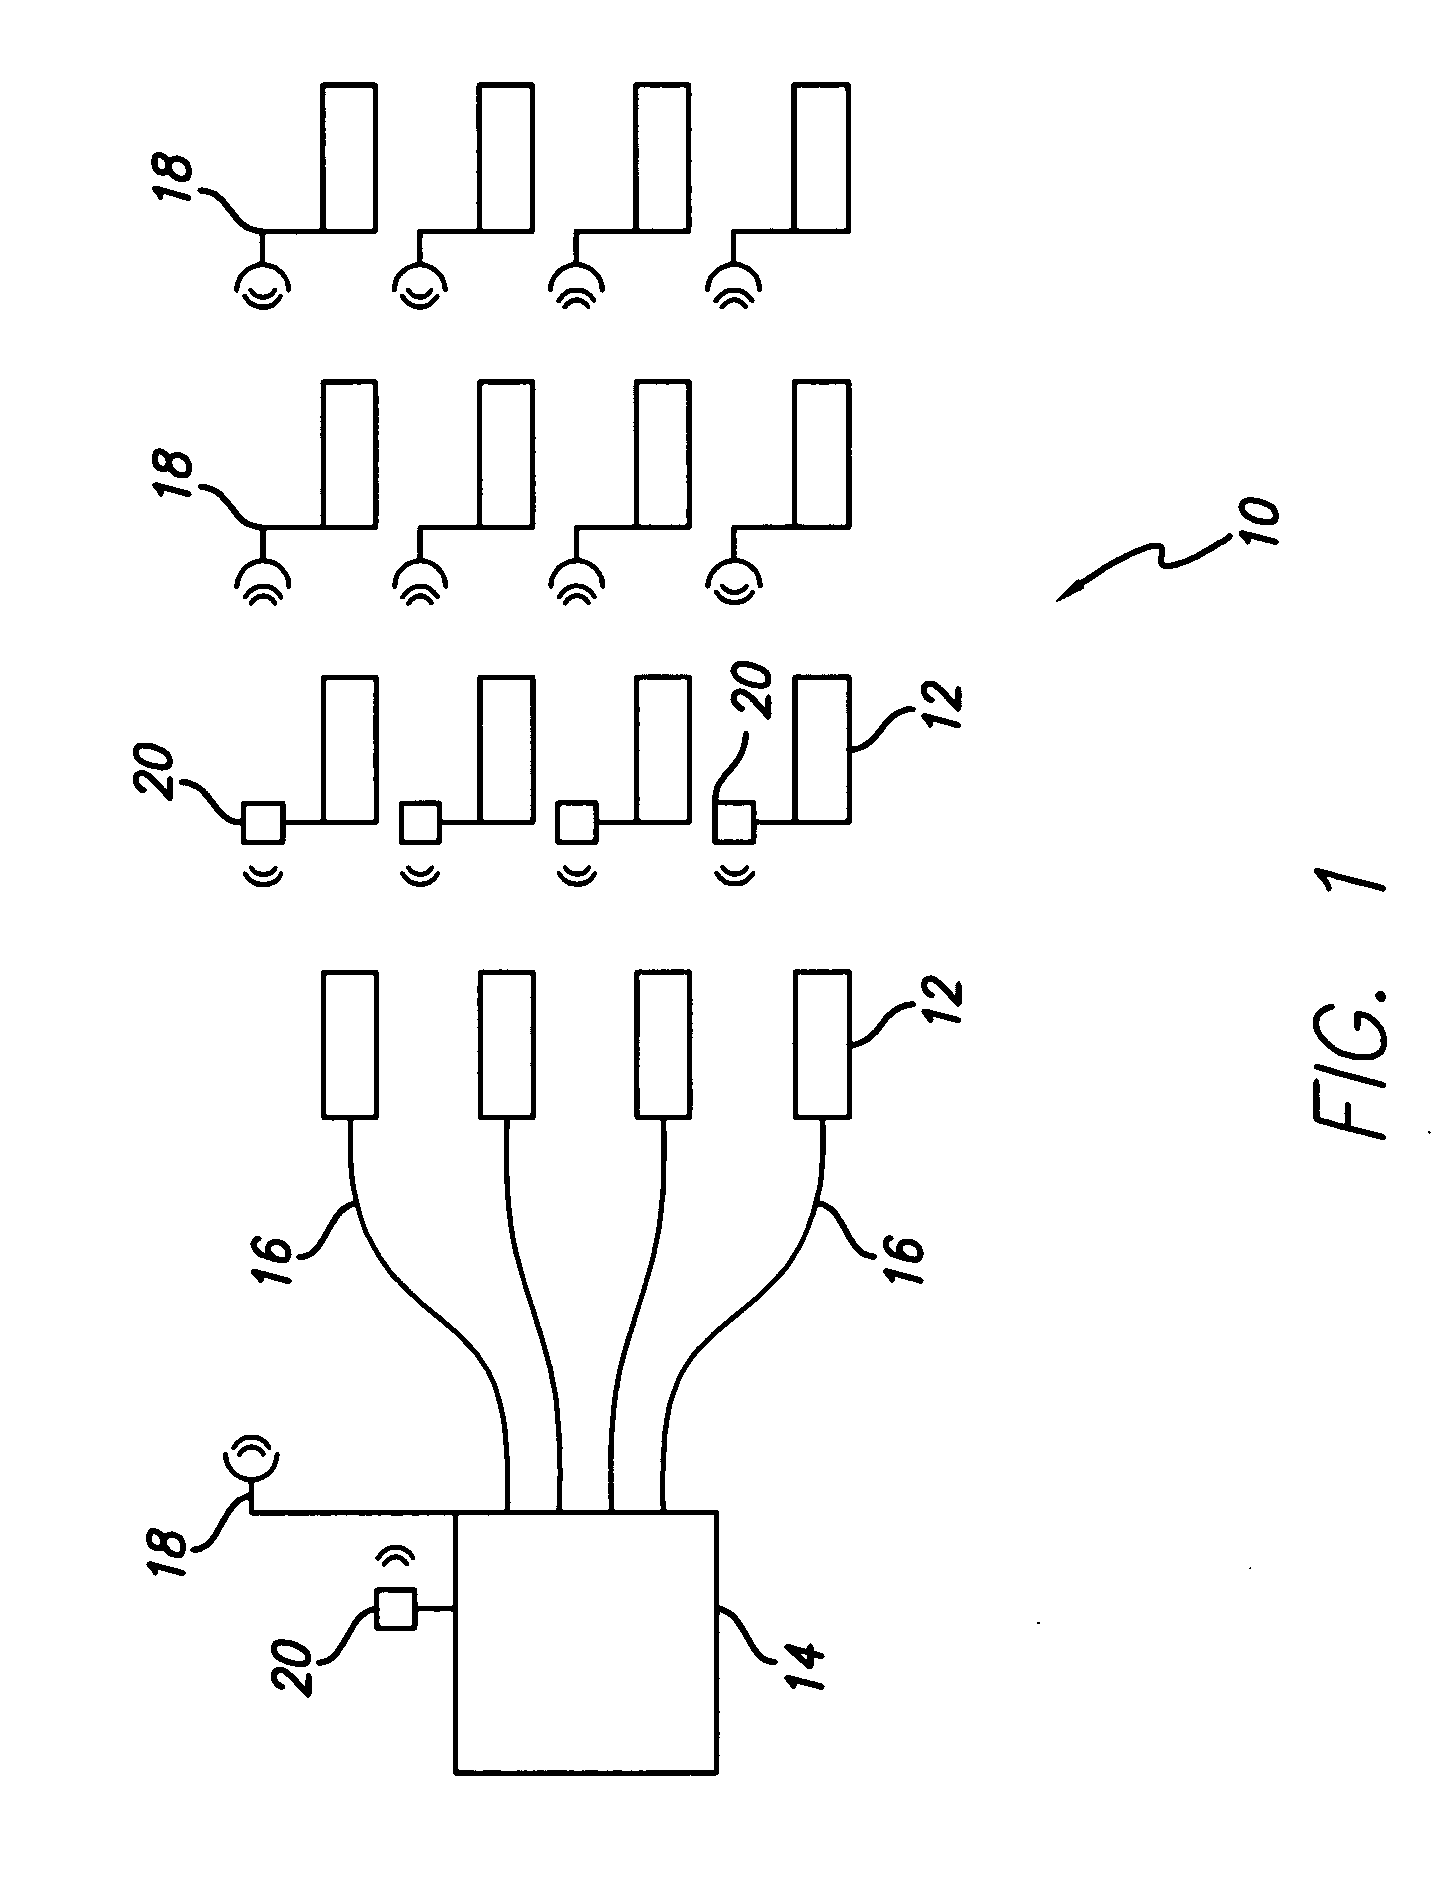 Electronic access control for amusement devices